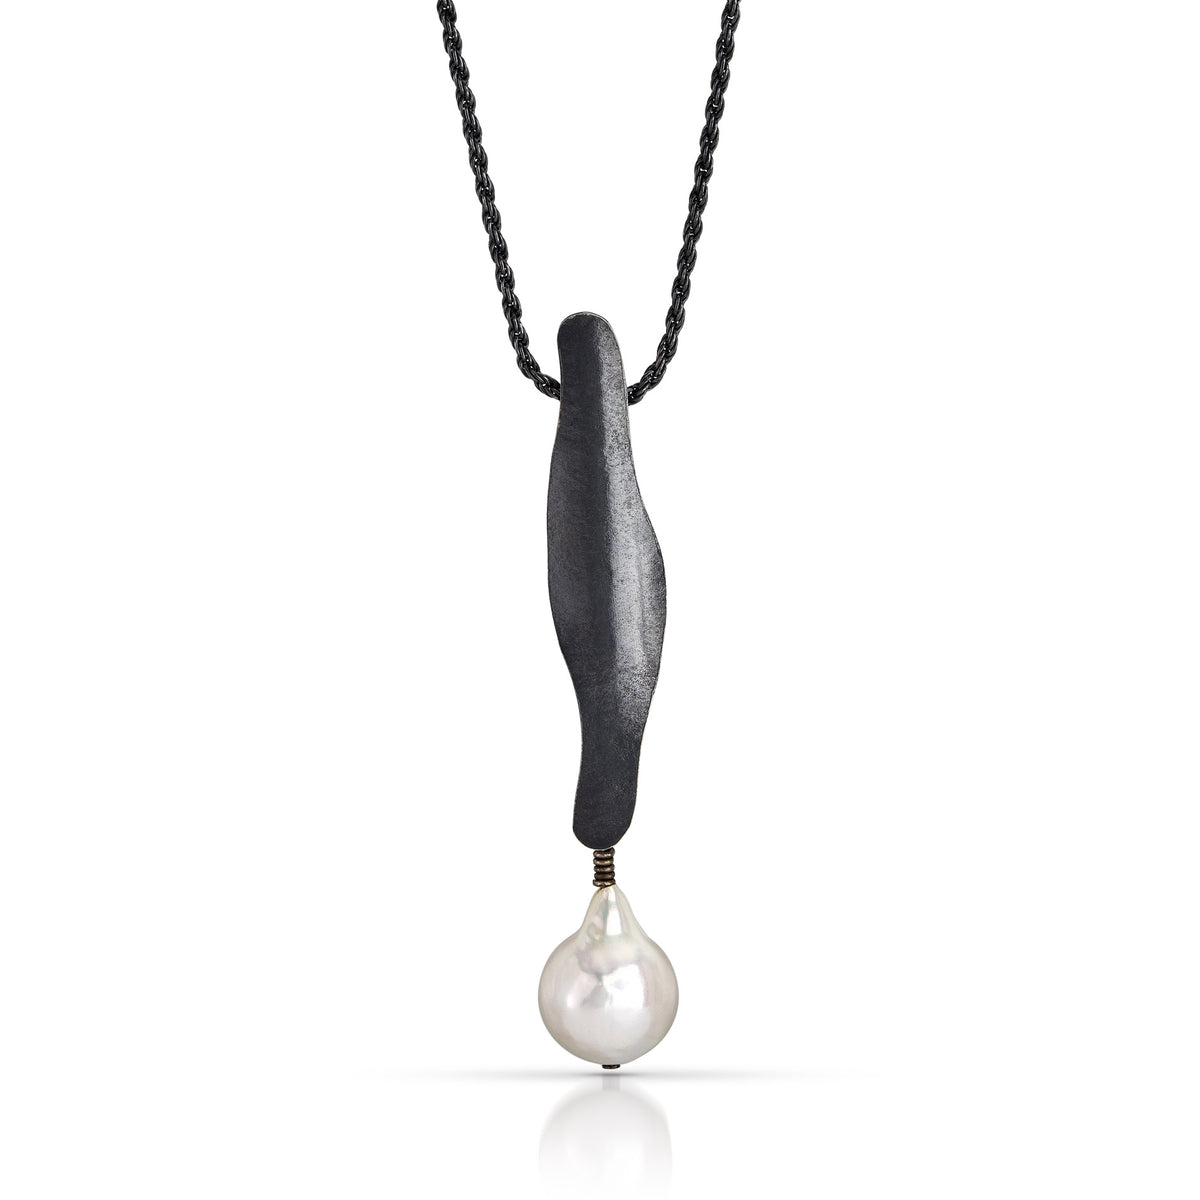 Suzanne Schwartz Drop Pearl Necklace with White Pearl